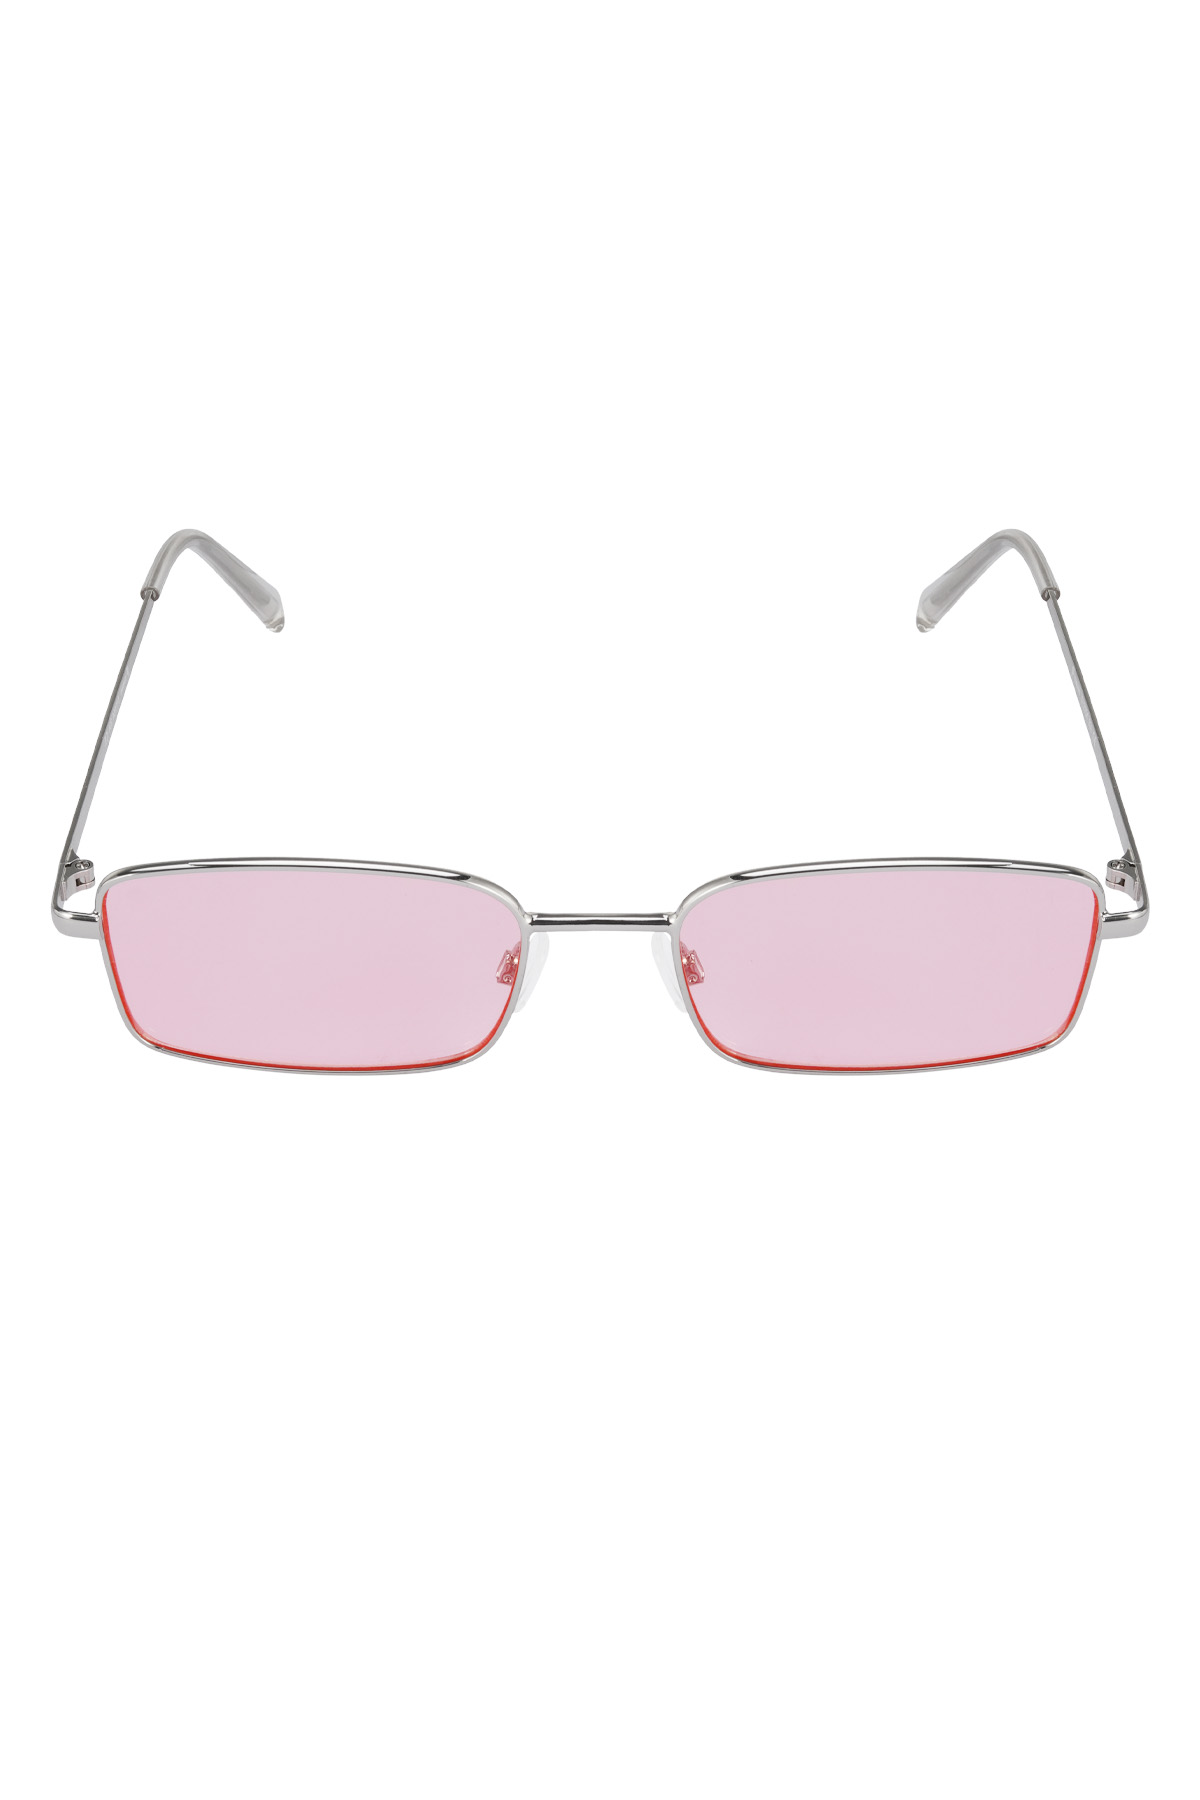 Sunglasses radiant view - pink gold Picture4